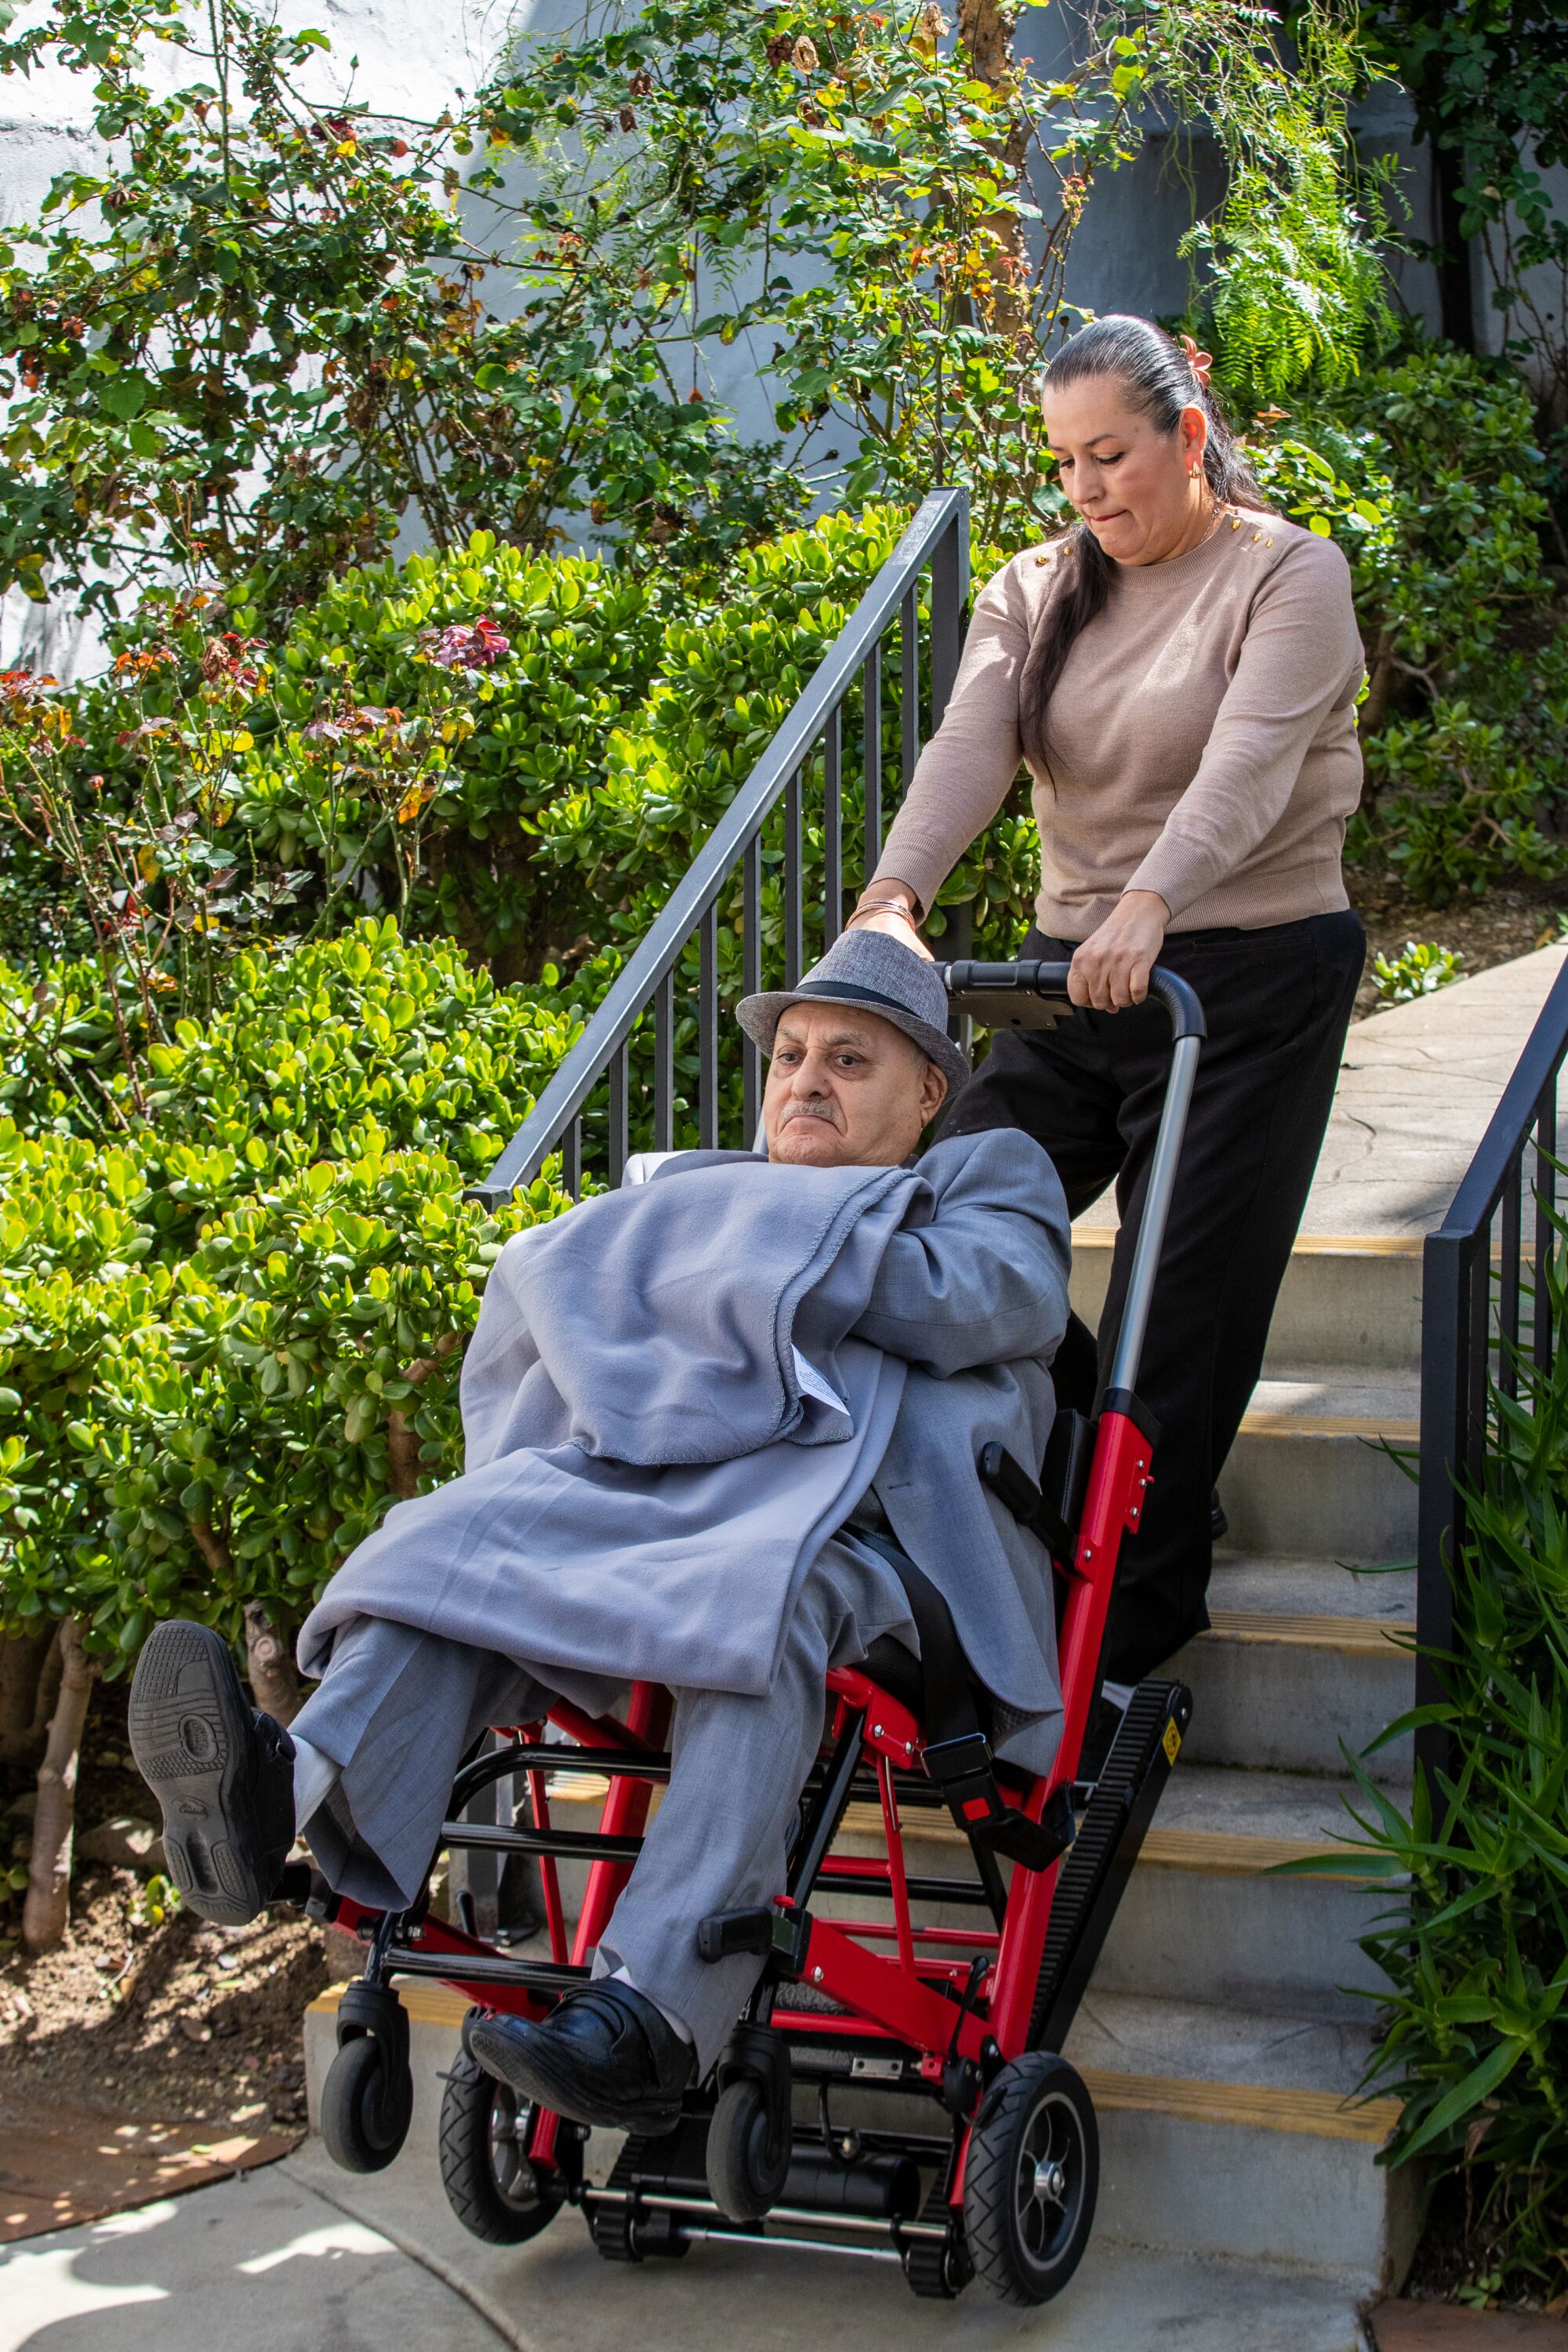  Patricia Santana pulls Ismael Anguiano, seated on a wheel-chair dolly, up a set of stairs.